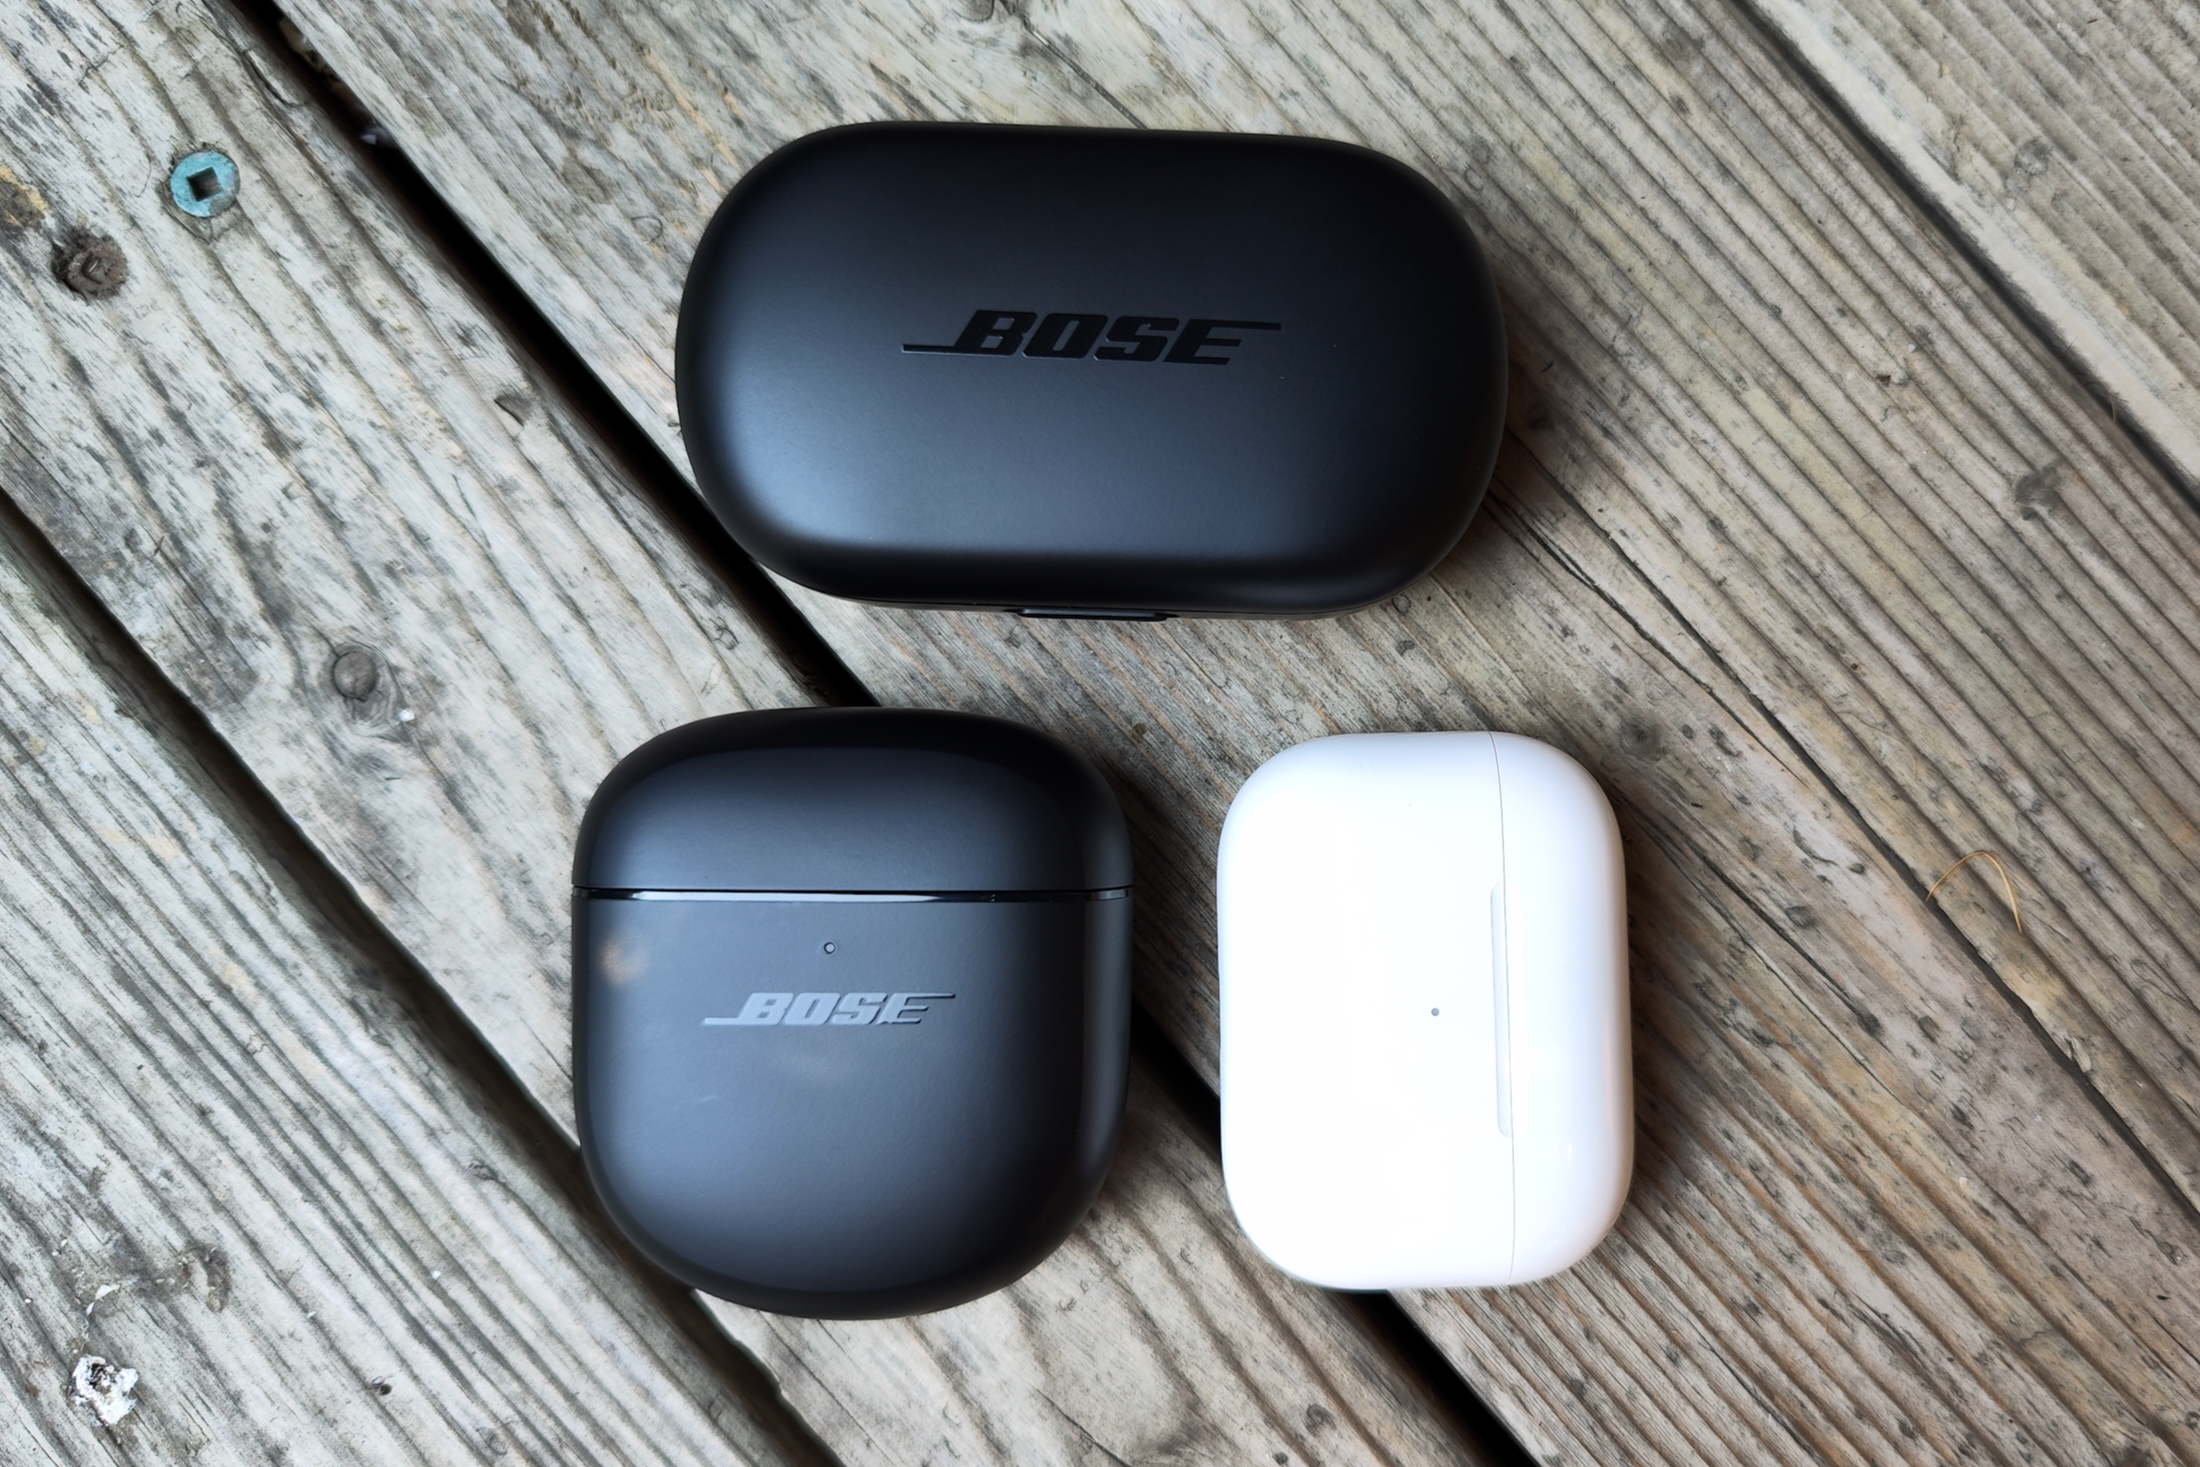 Charging cases for Apple AirPods Pro seen beside charging cases for first and second-gen Bose QuietComfort Earbuds.